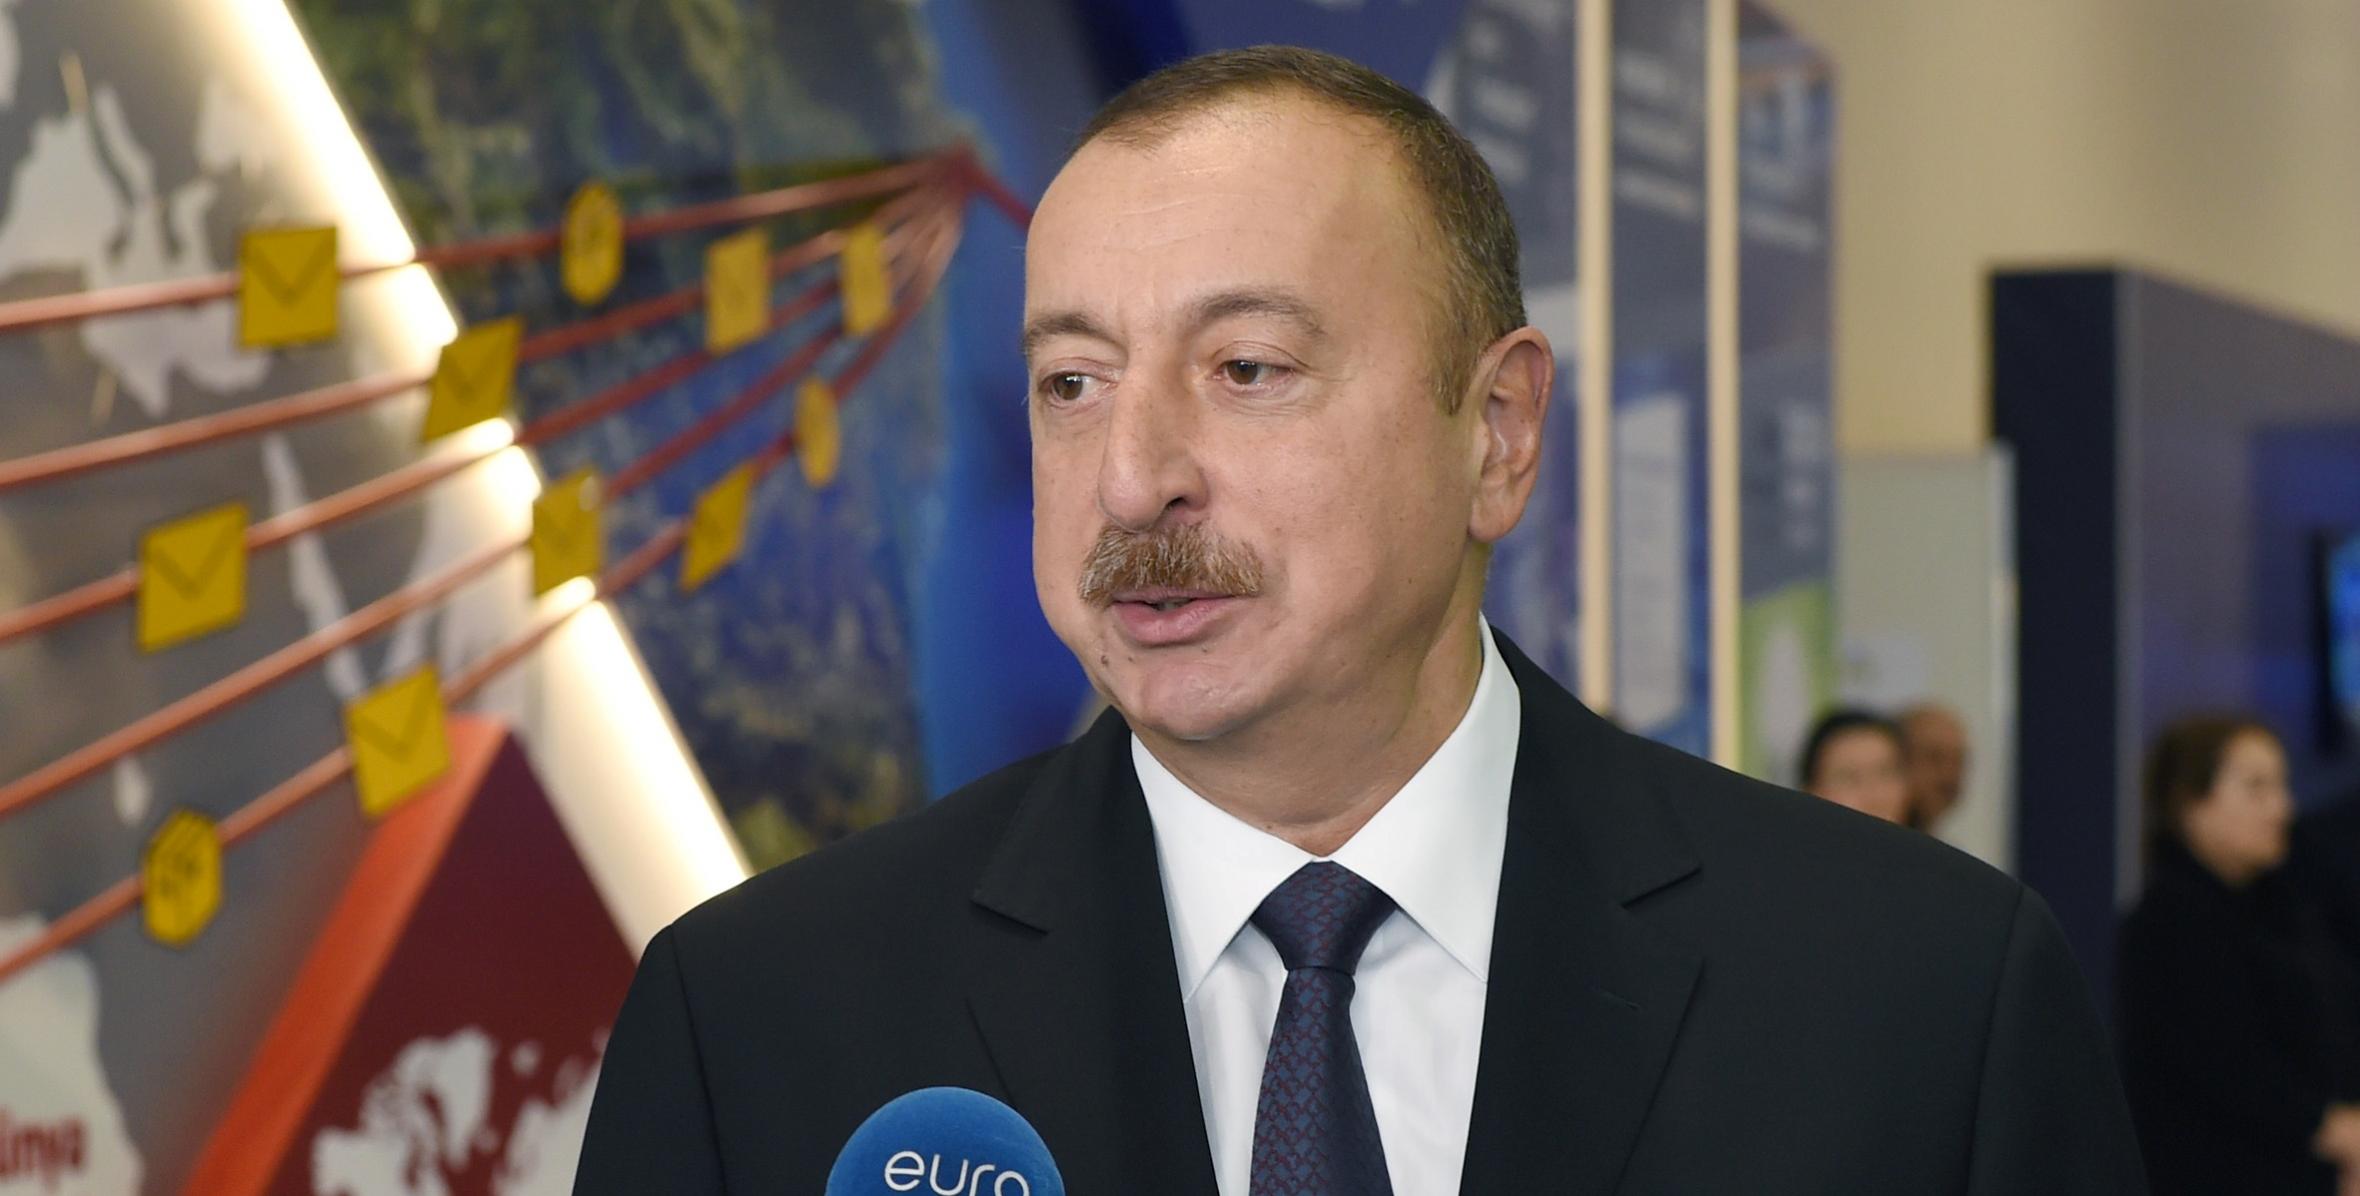 Ilham Aliyev responded to questions from Euronews and Russia-24 channels